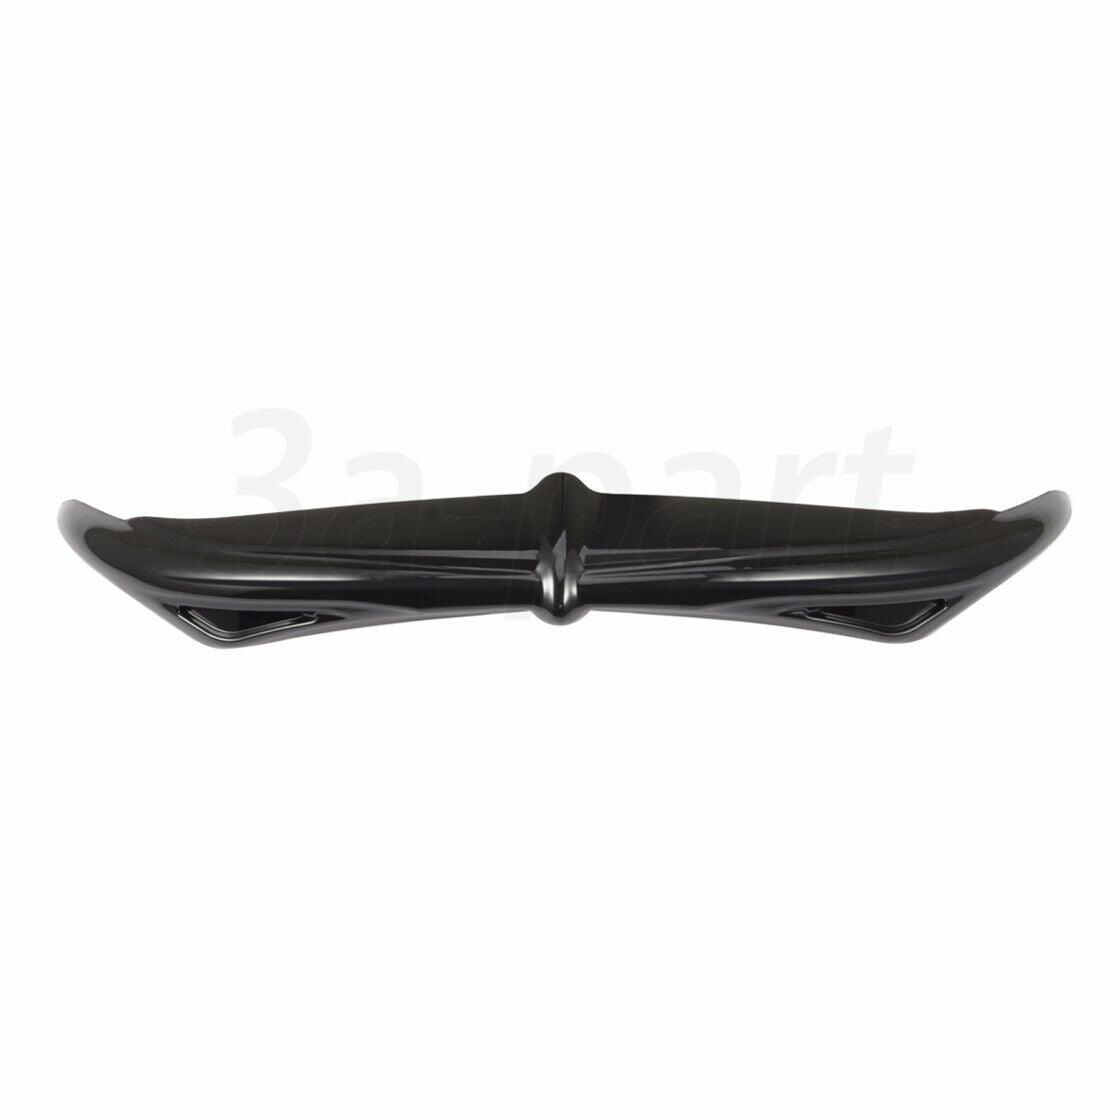 Black Bat Brow Fairing ABS Plastic Fit for Harley Tri Glide Street Glide 1996-13 - Moto Life Products